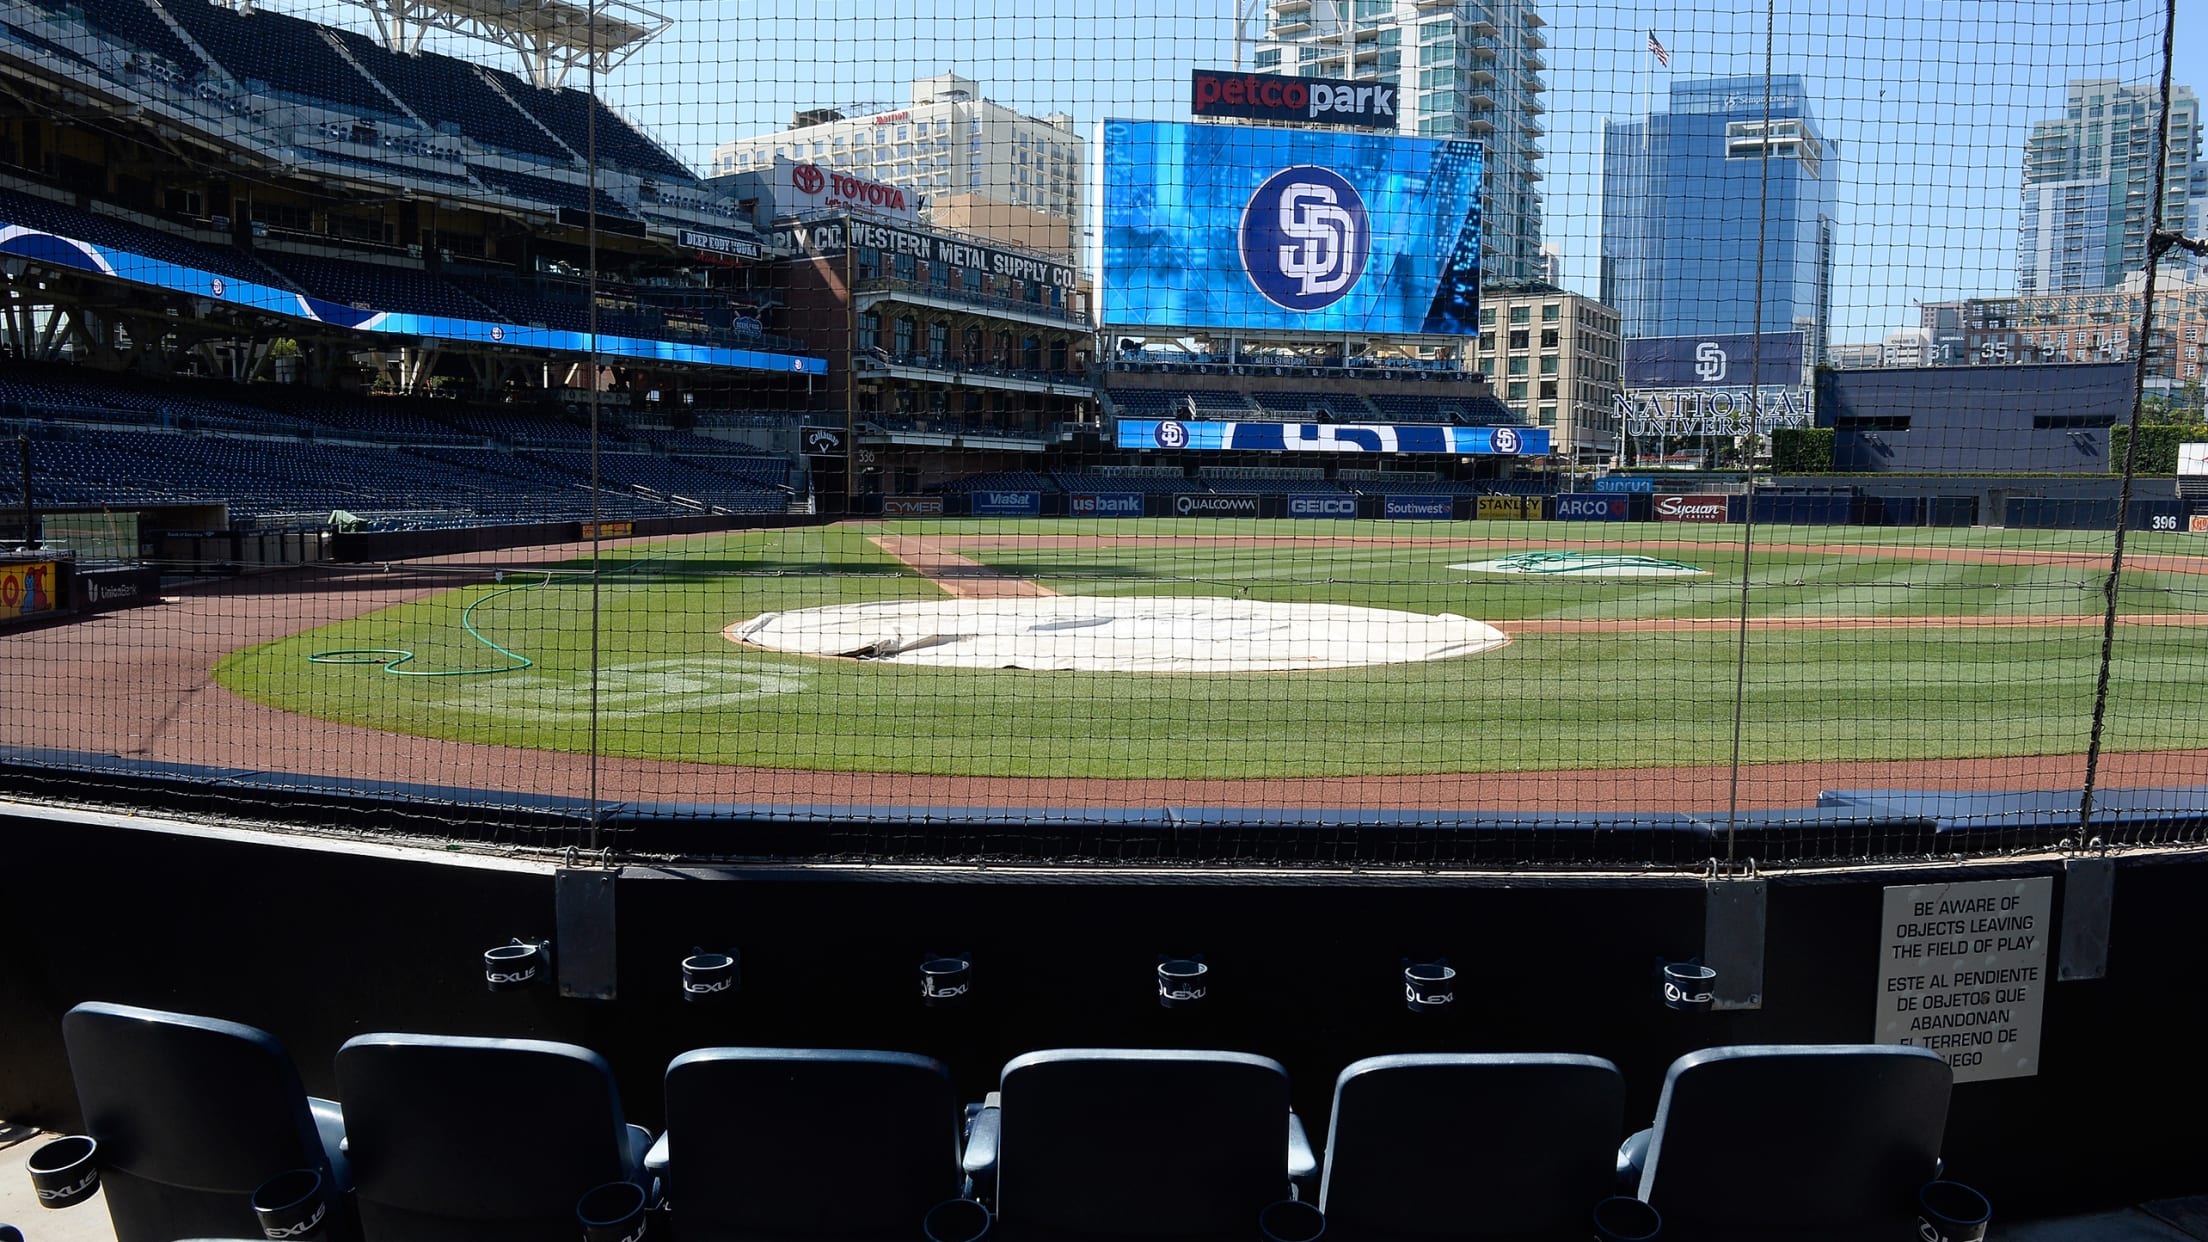 Padres on deck: Out-of-contention White Sox visit Petco - The San